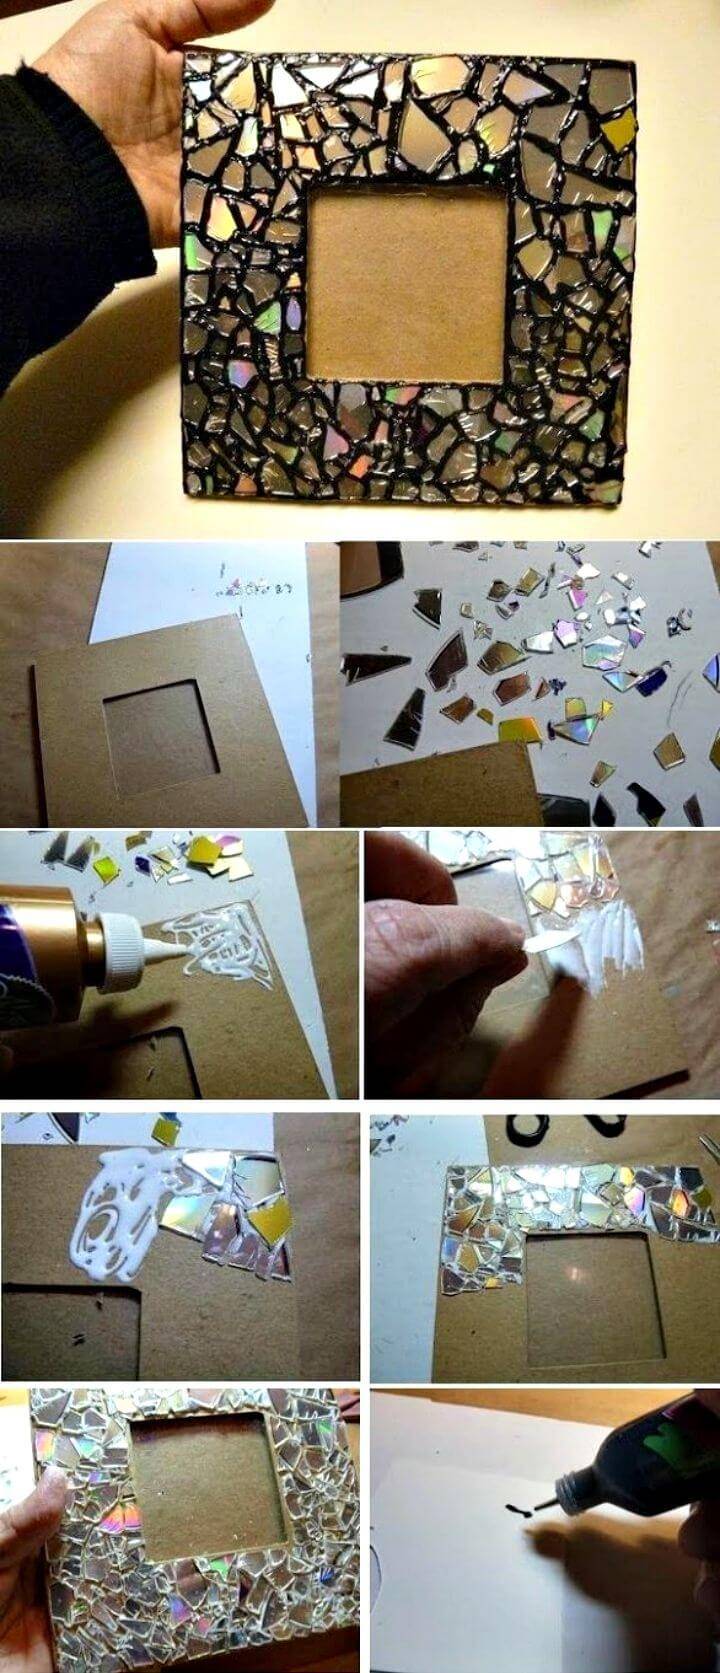 How To DIY Mosaic Frame from Old CDs